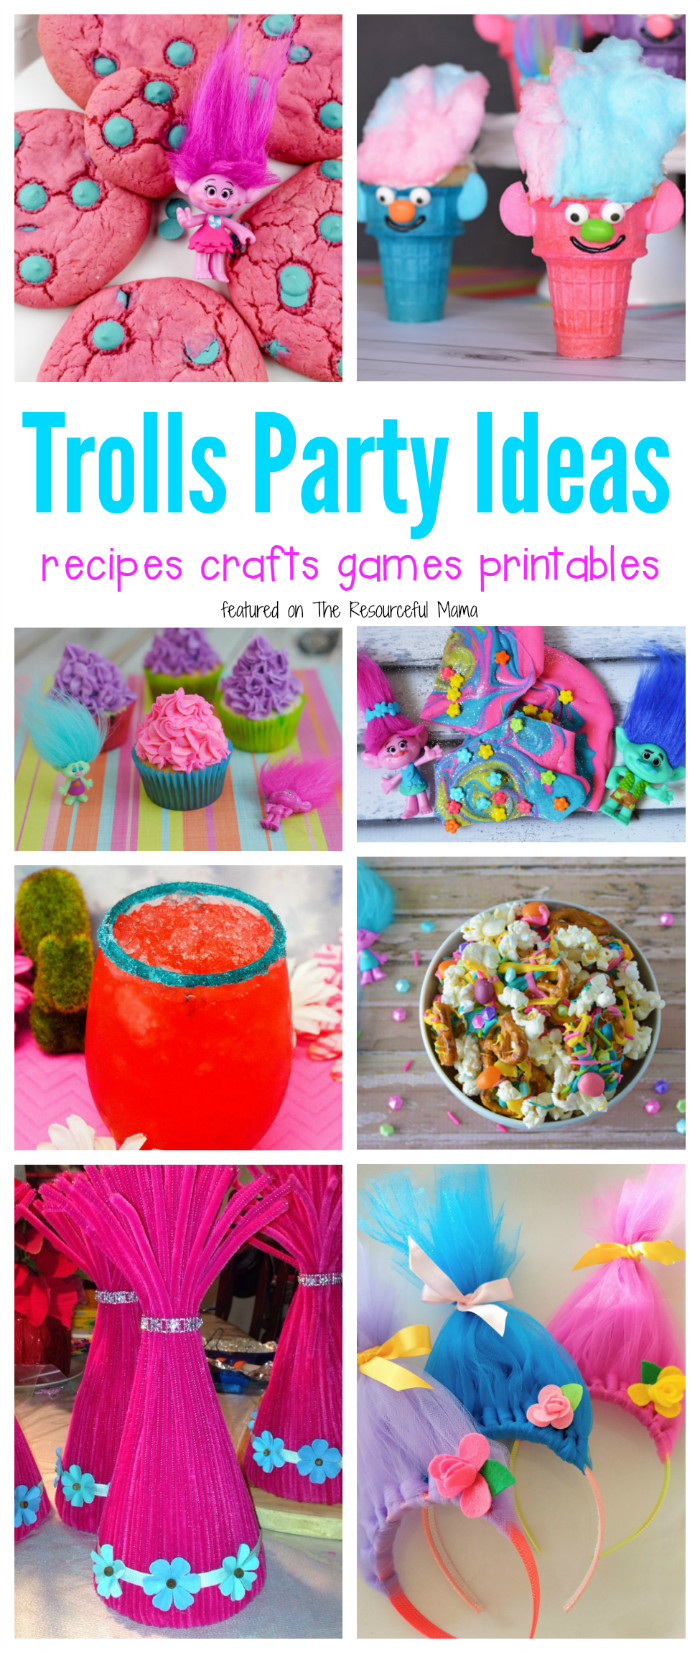 Food Ideas For Trolls Party
 Pin on The Resourceful Mama